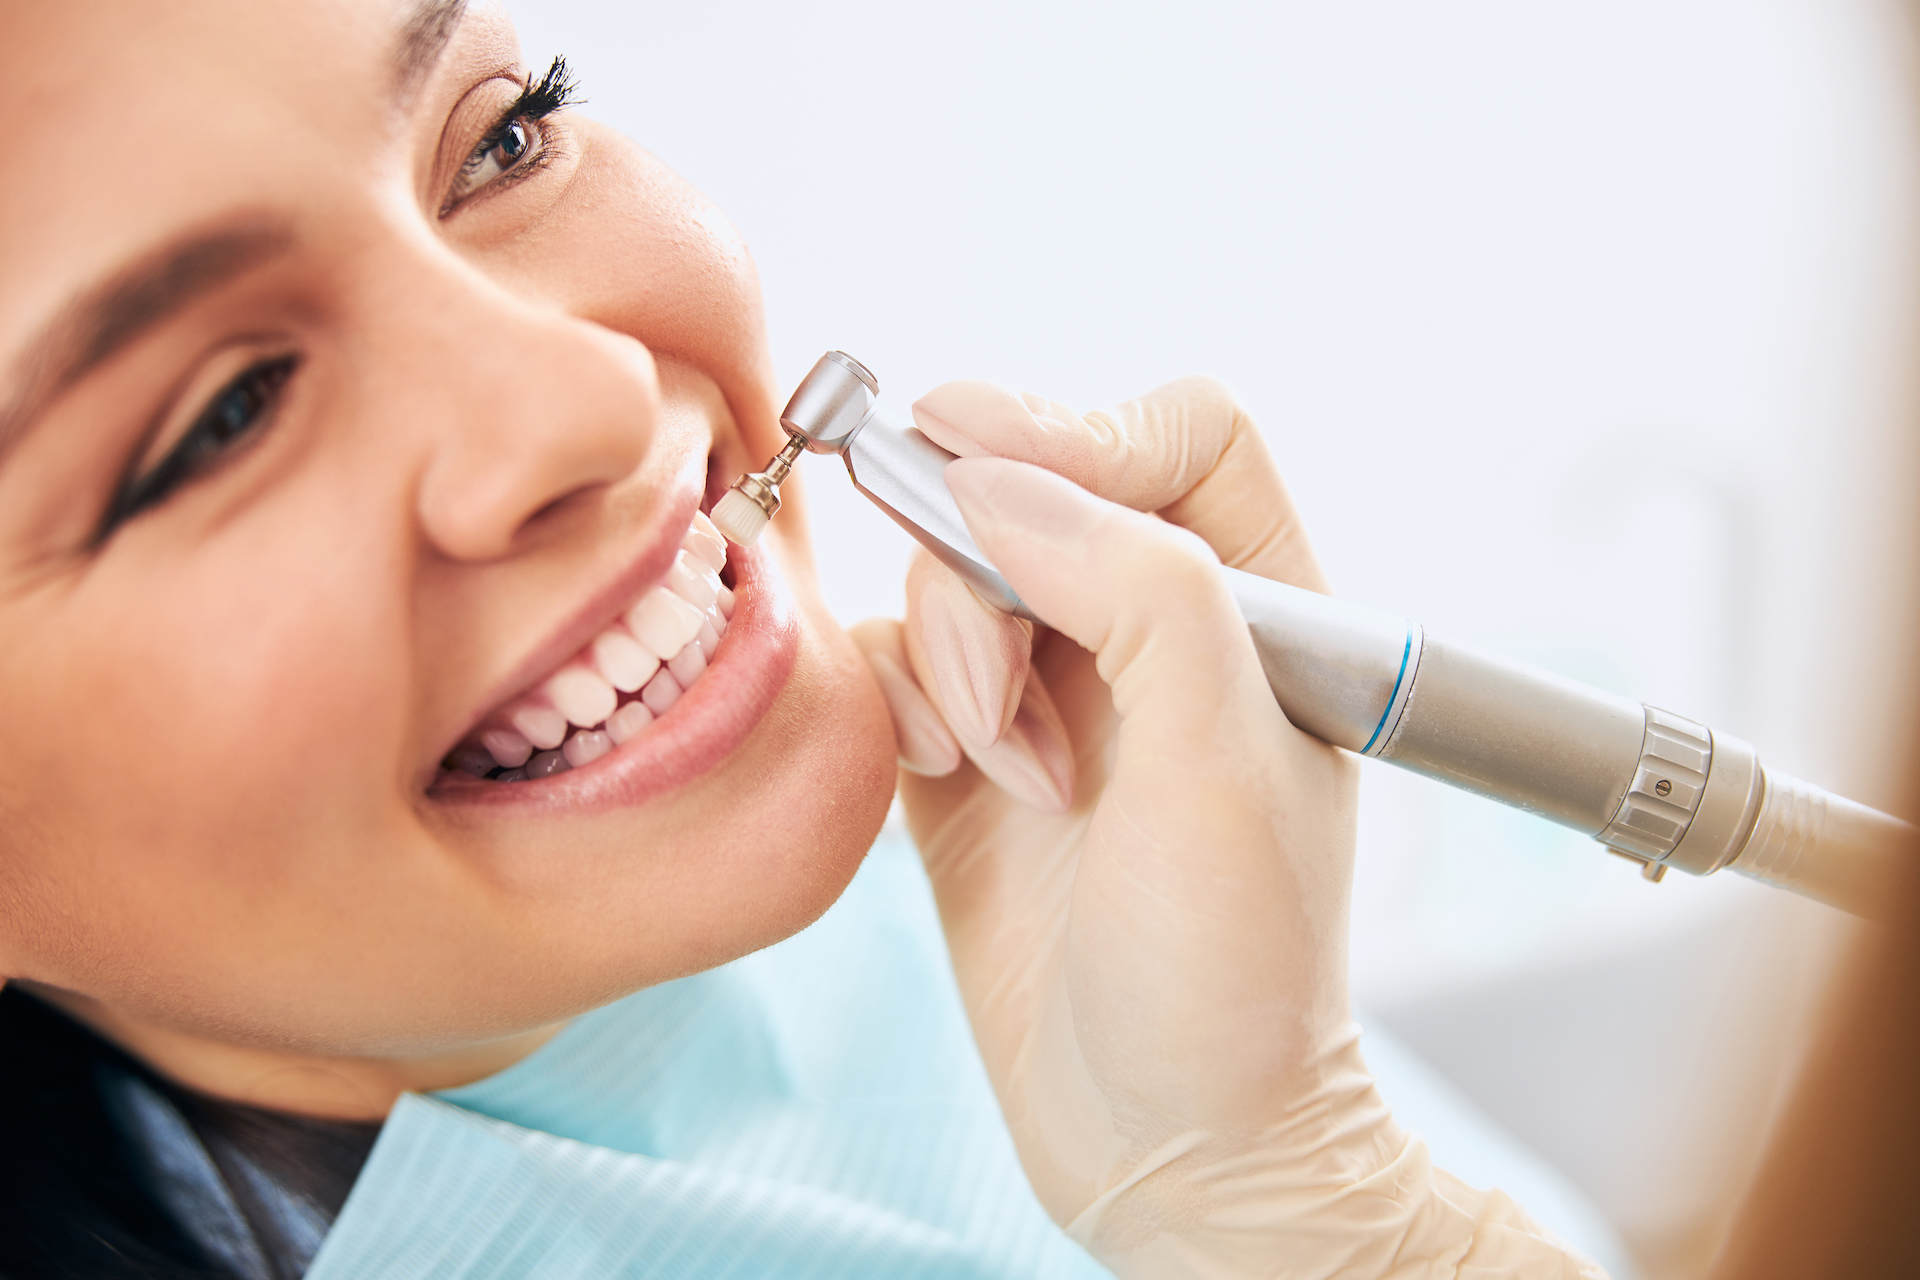 Adult teeth cleaning